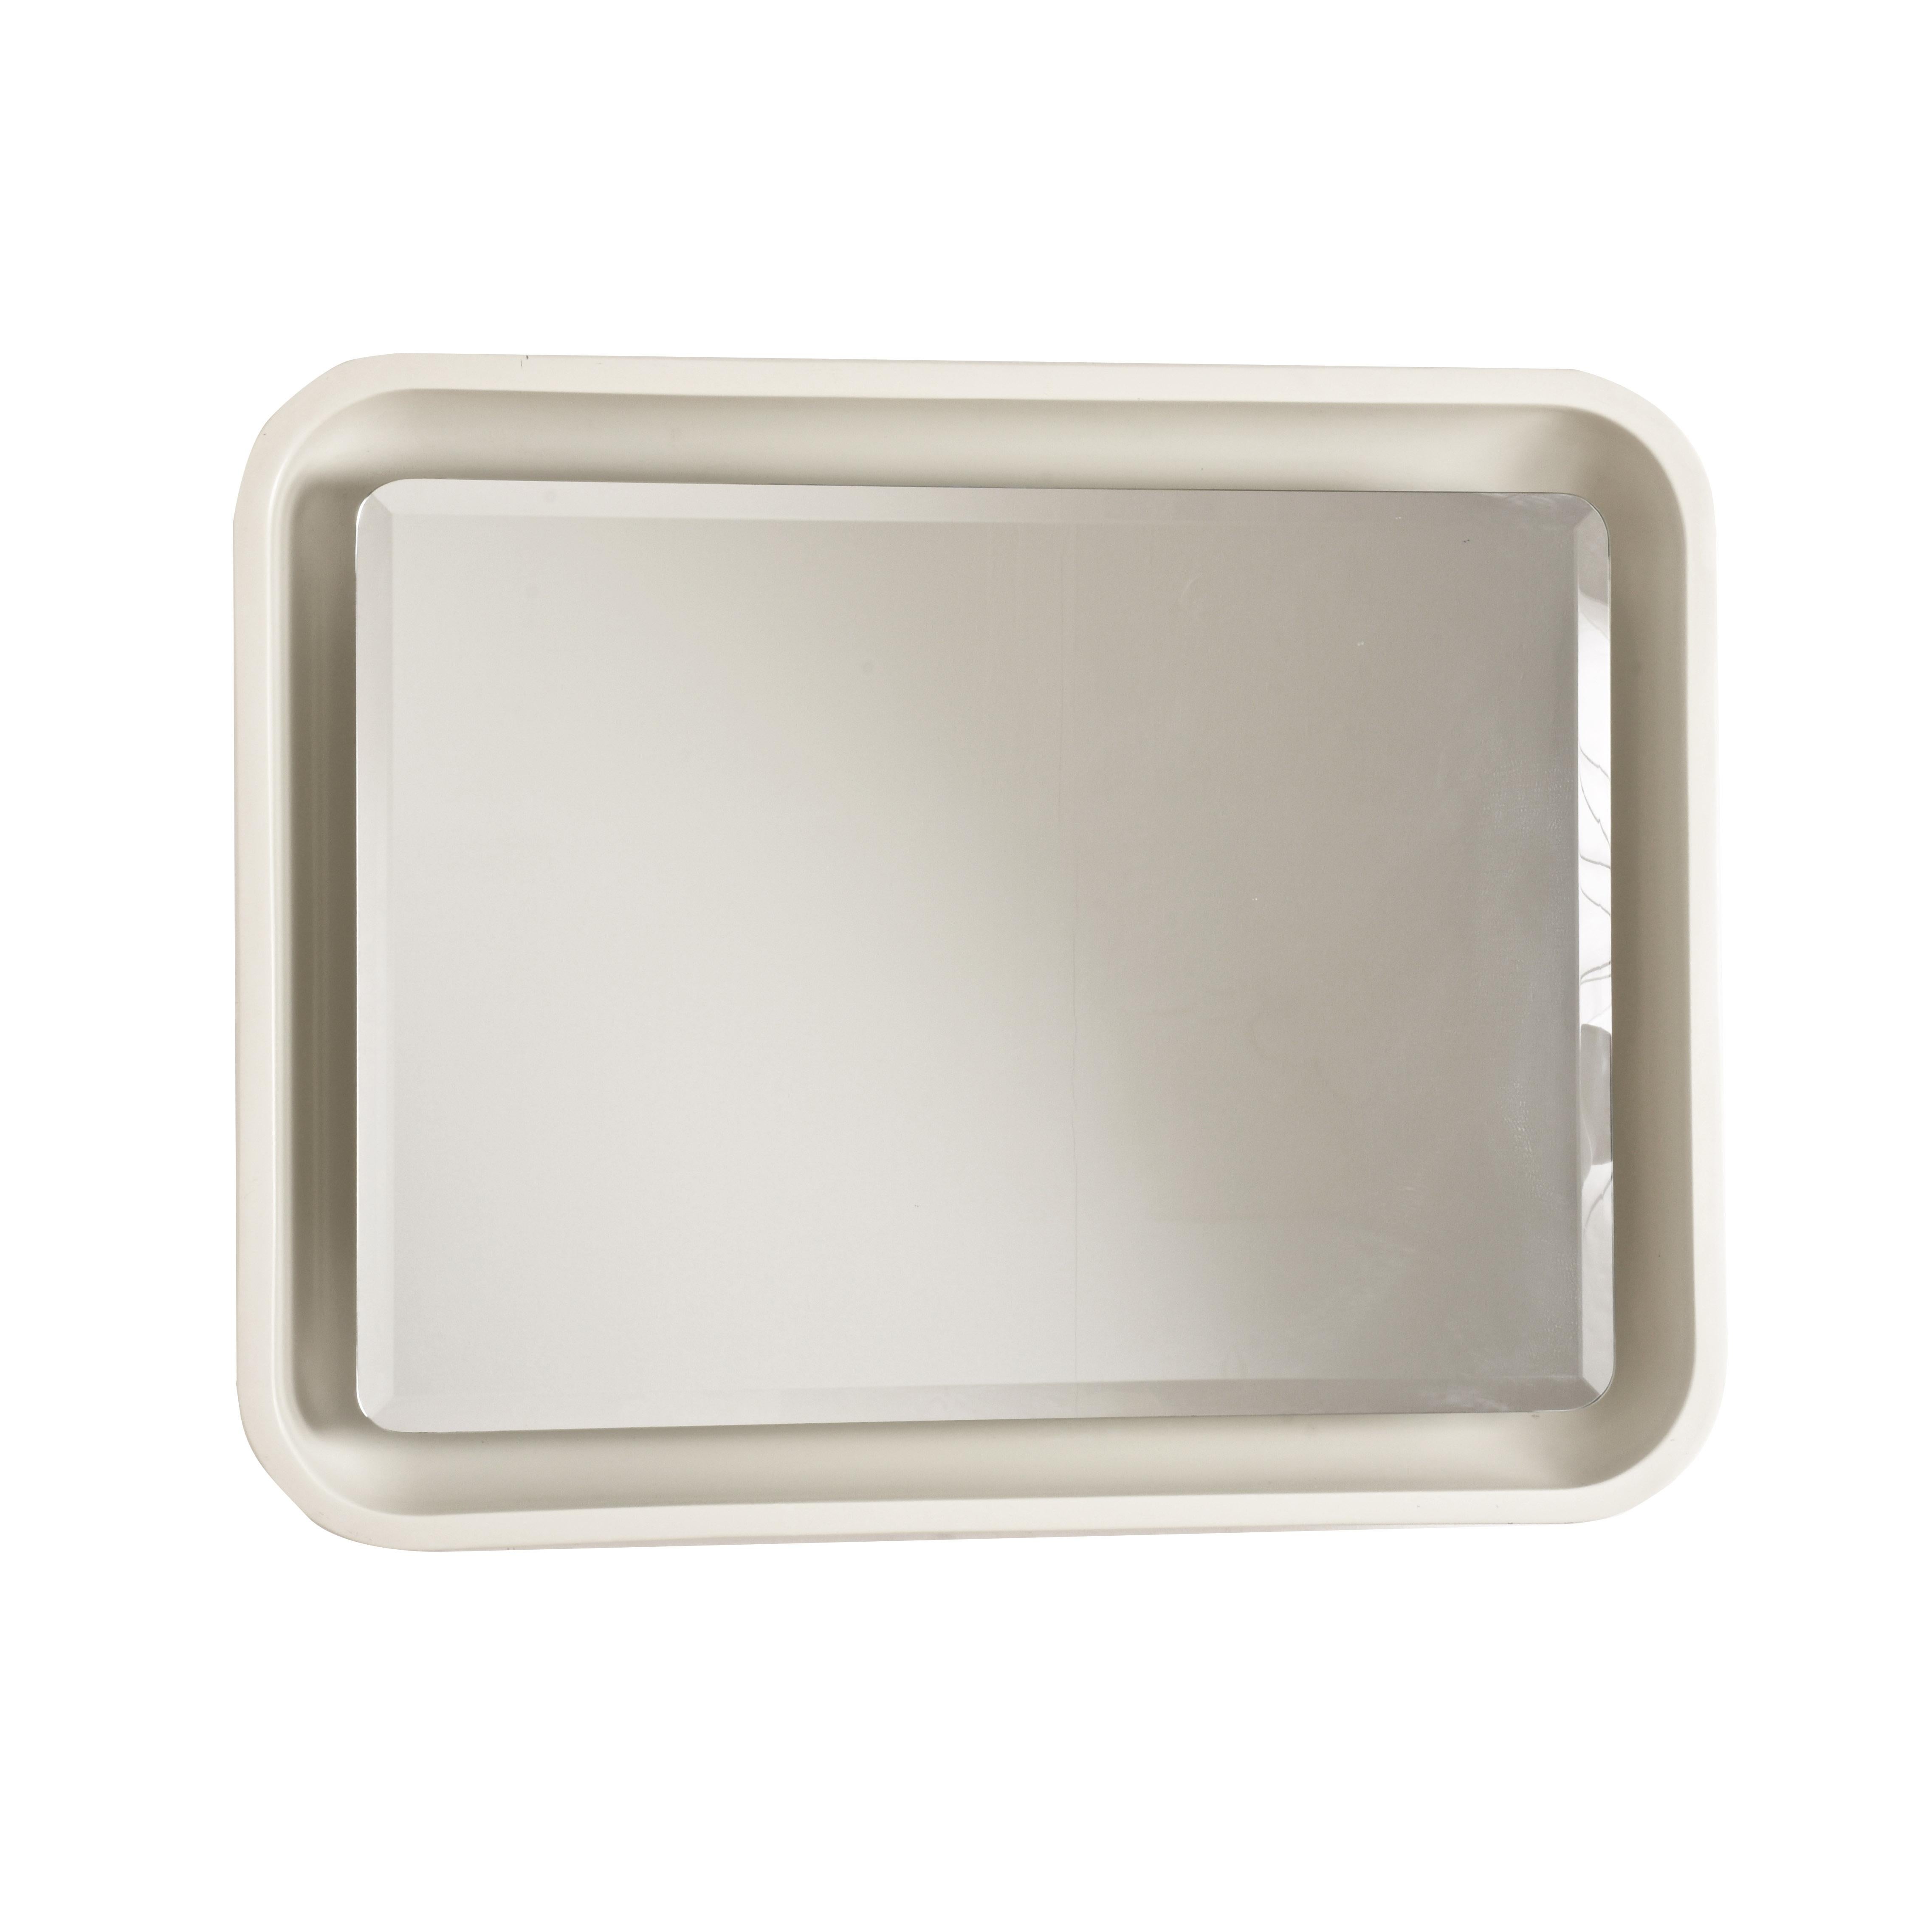 Backlit wall mirror. The mirror can be horizontally or vertically.
Frame dimensions: 35 x 27 in. 89 x 69 cm
Measurements of the mirror: 29.5 x 21.5 in 75 x 55 cm.